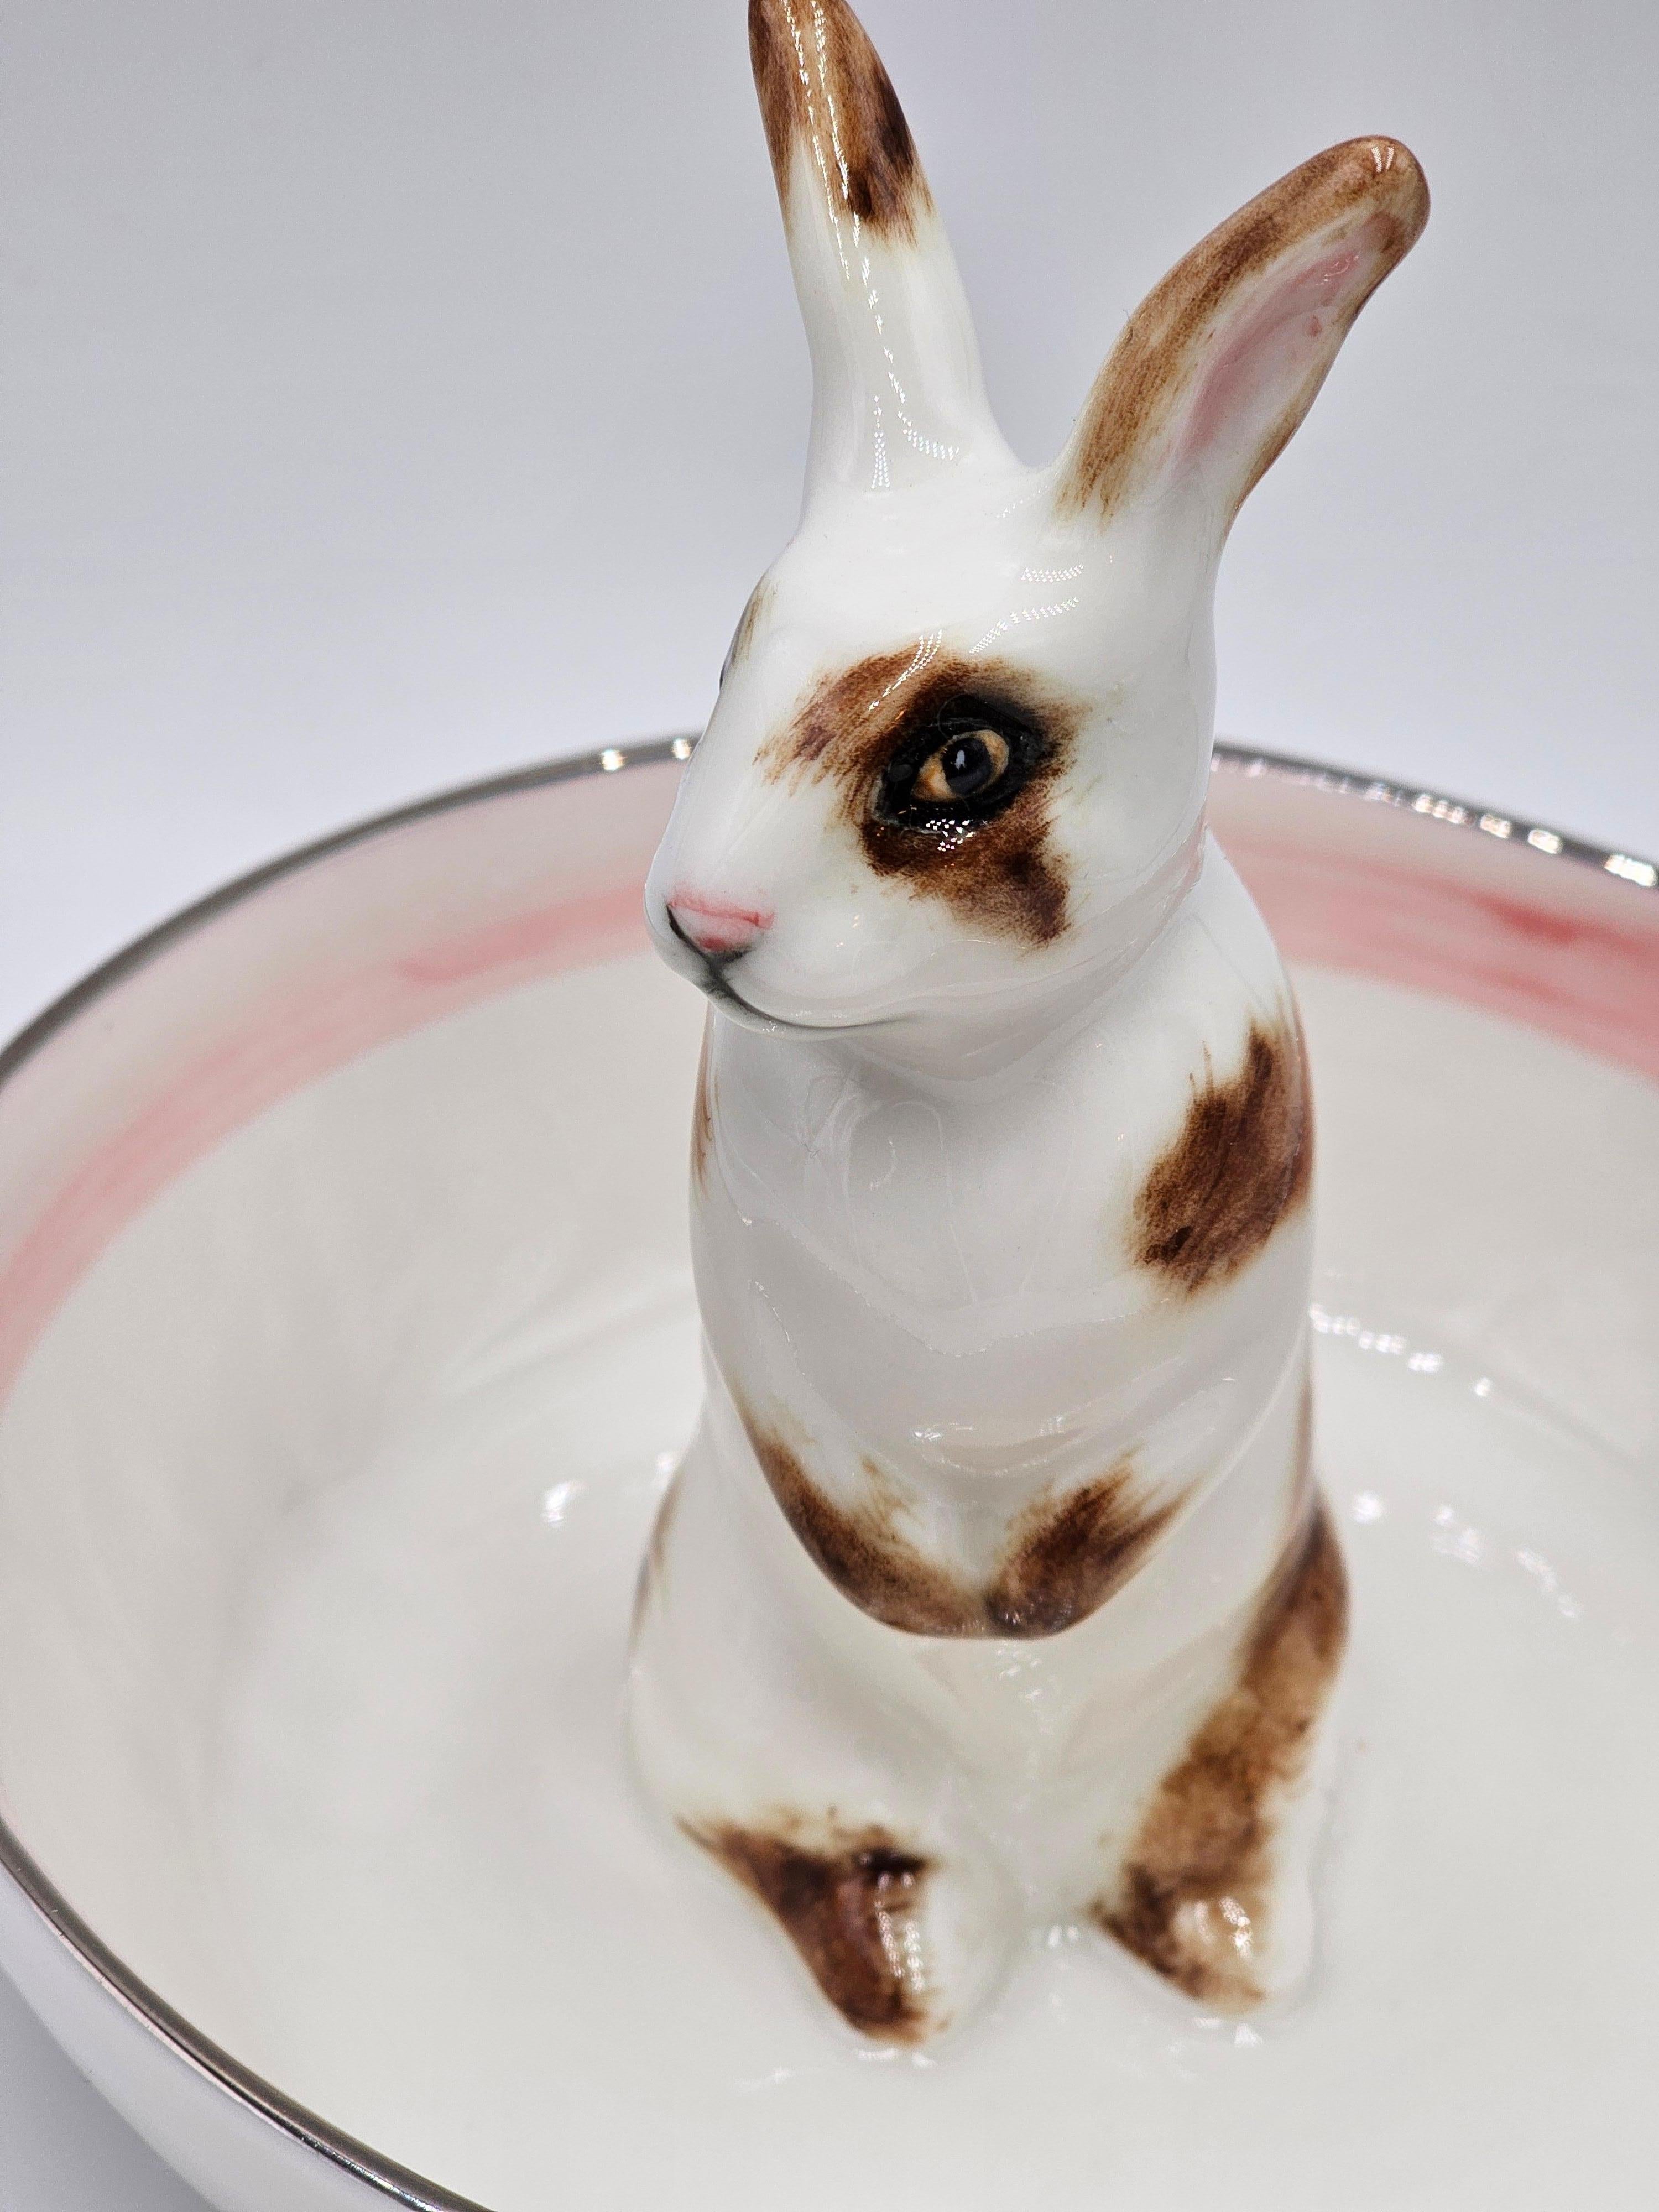 German Country Style Porcelain Bowl with Easter Hare Figure Sofina Boutique Kitzbuehel For Sale